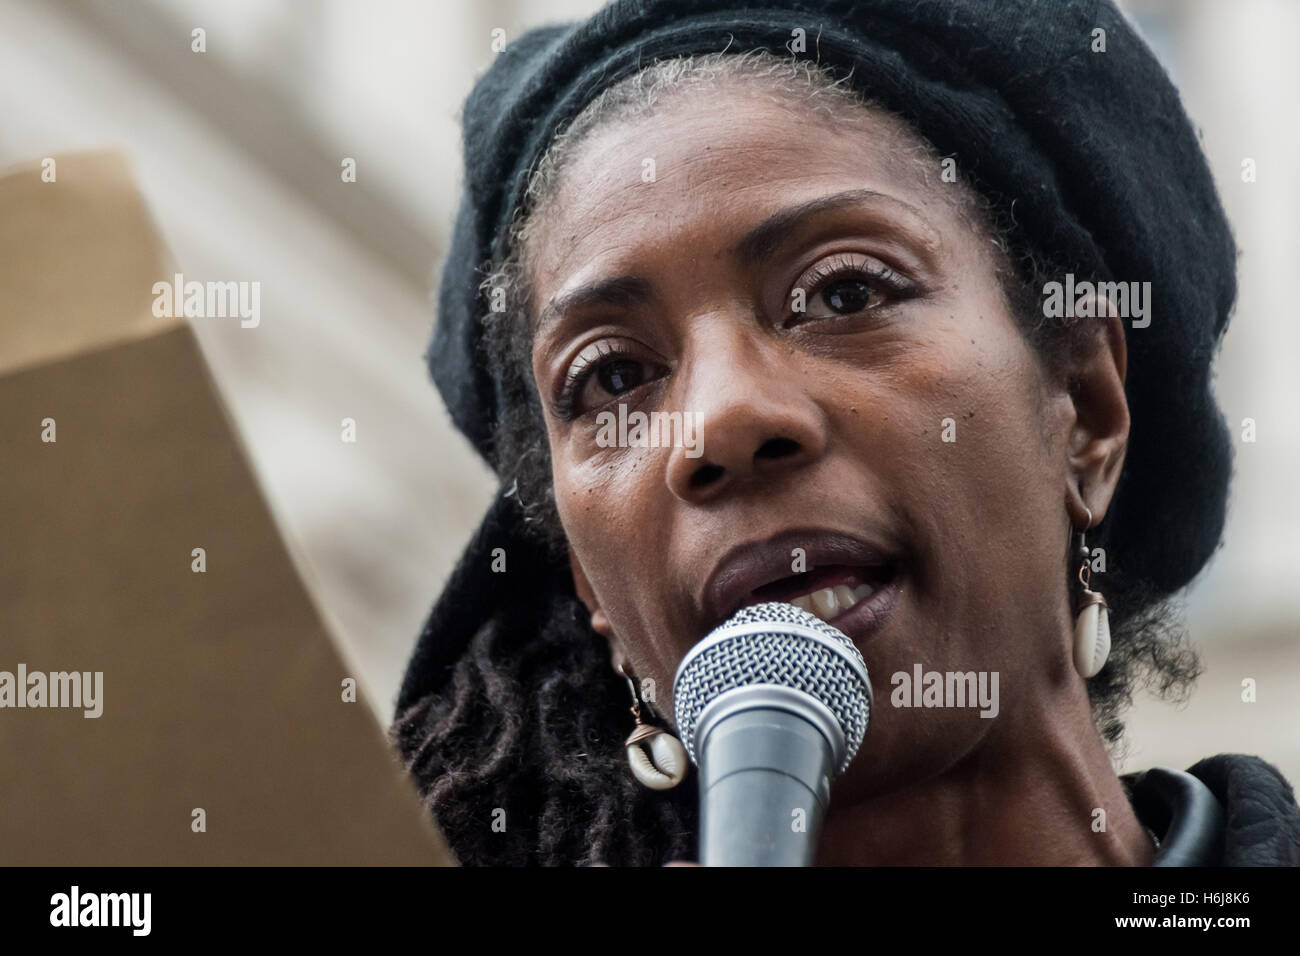 London, UK. 29th October 2016. Marcia Rigg, whose brother Sean was killed in Brixton Police Station in 2008 speaks at the annual rally by the United Families and friends of people killed by police or in prisons at Downing St. Peter Marshall/Alamy Live News Stock Photo